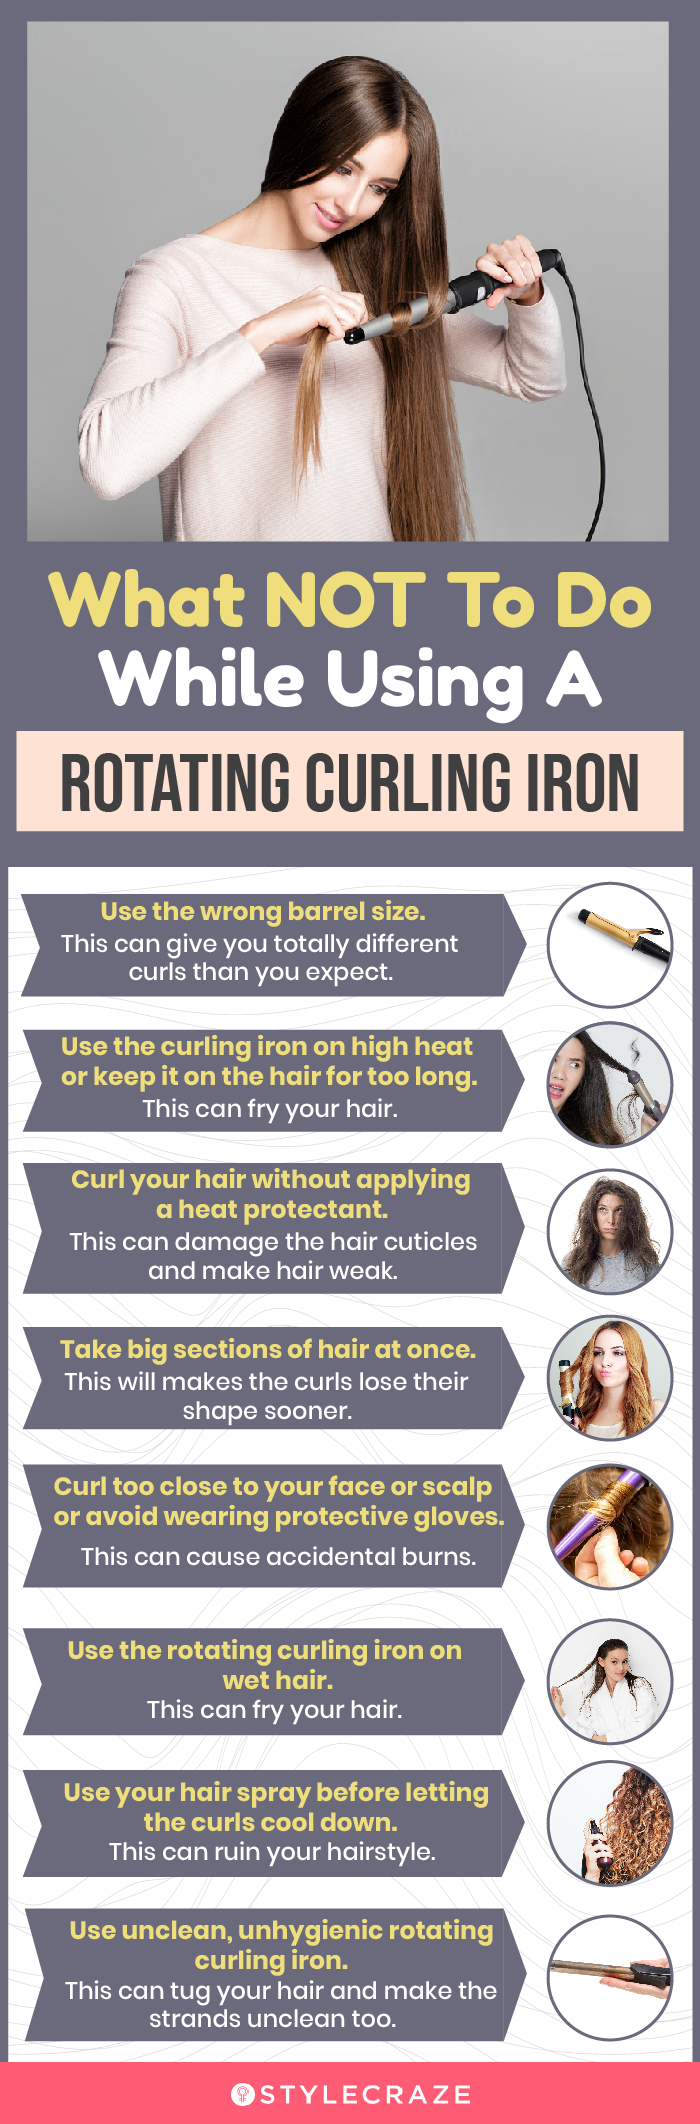 What NOT To Do While Using A Rotating Curling Iron (infographic)